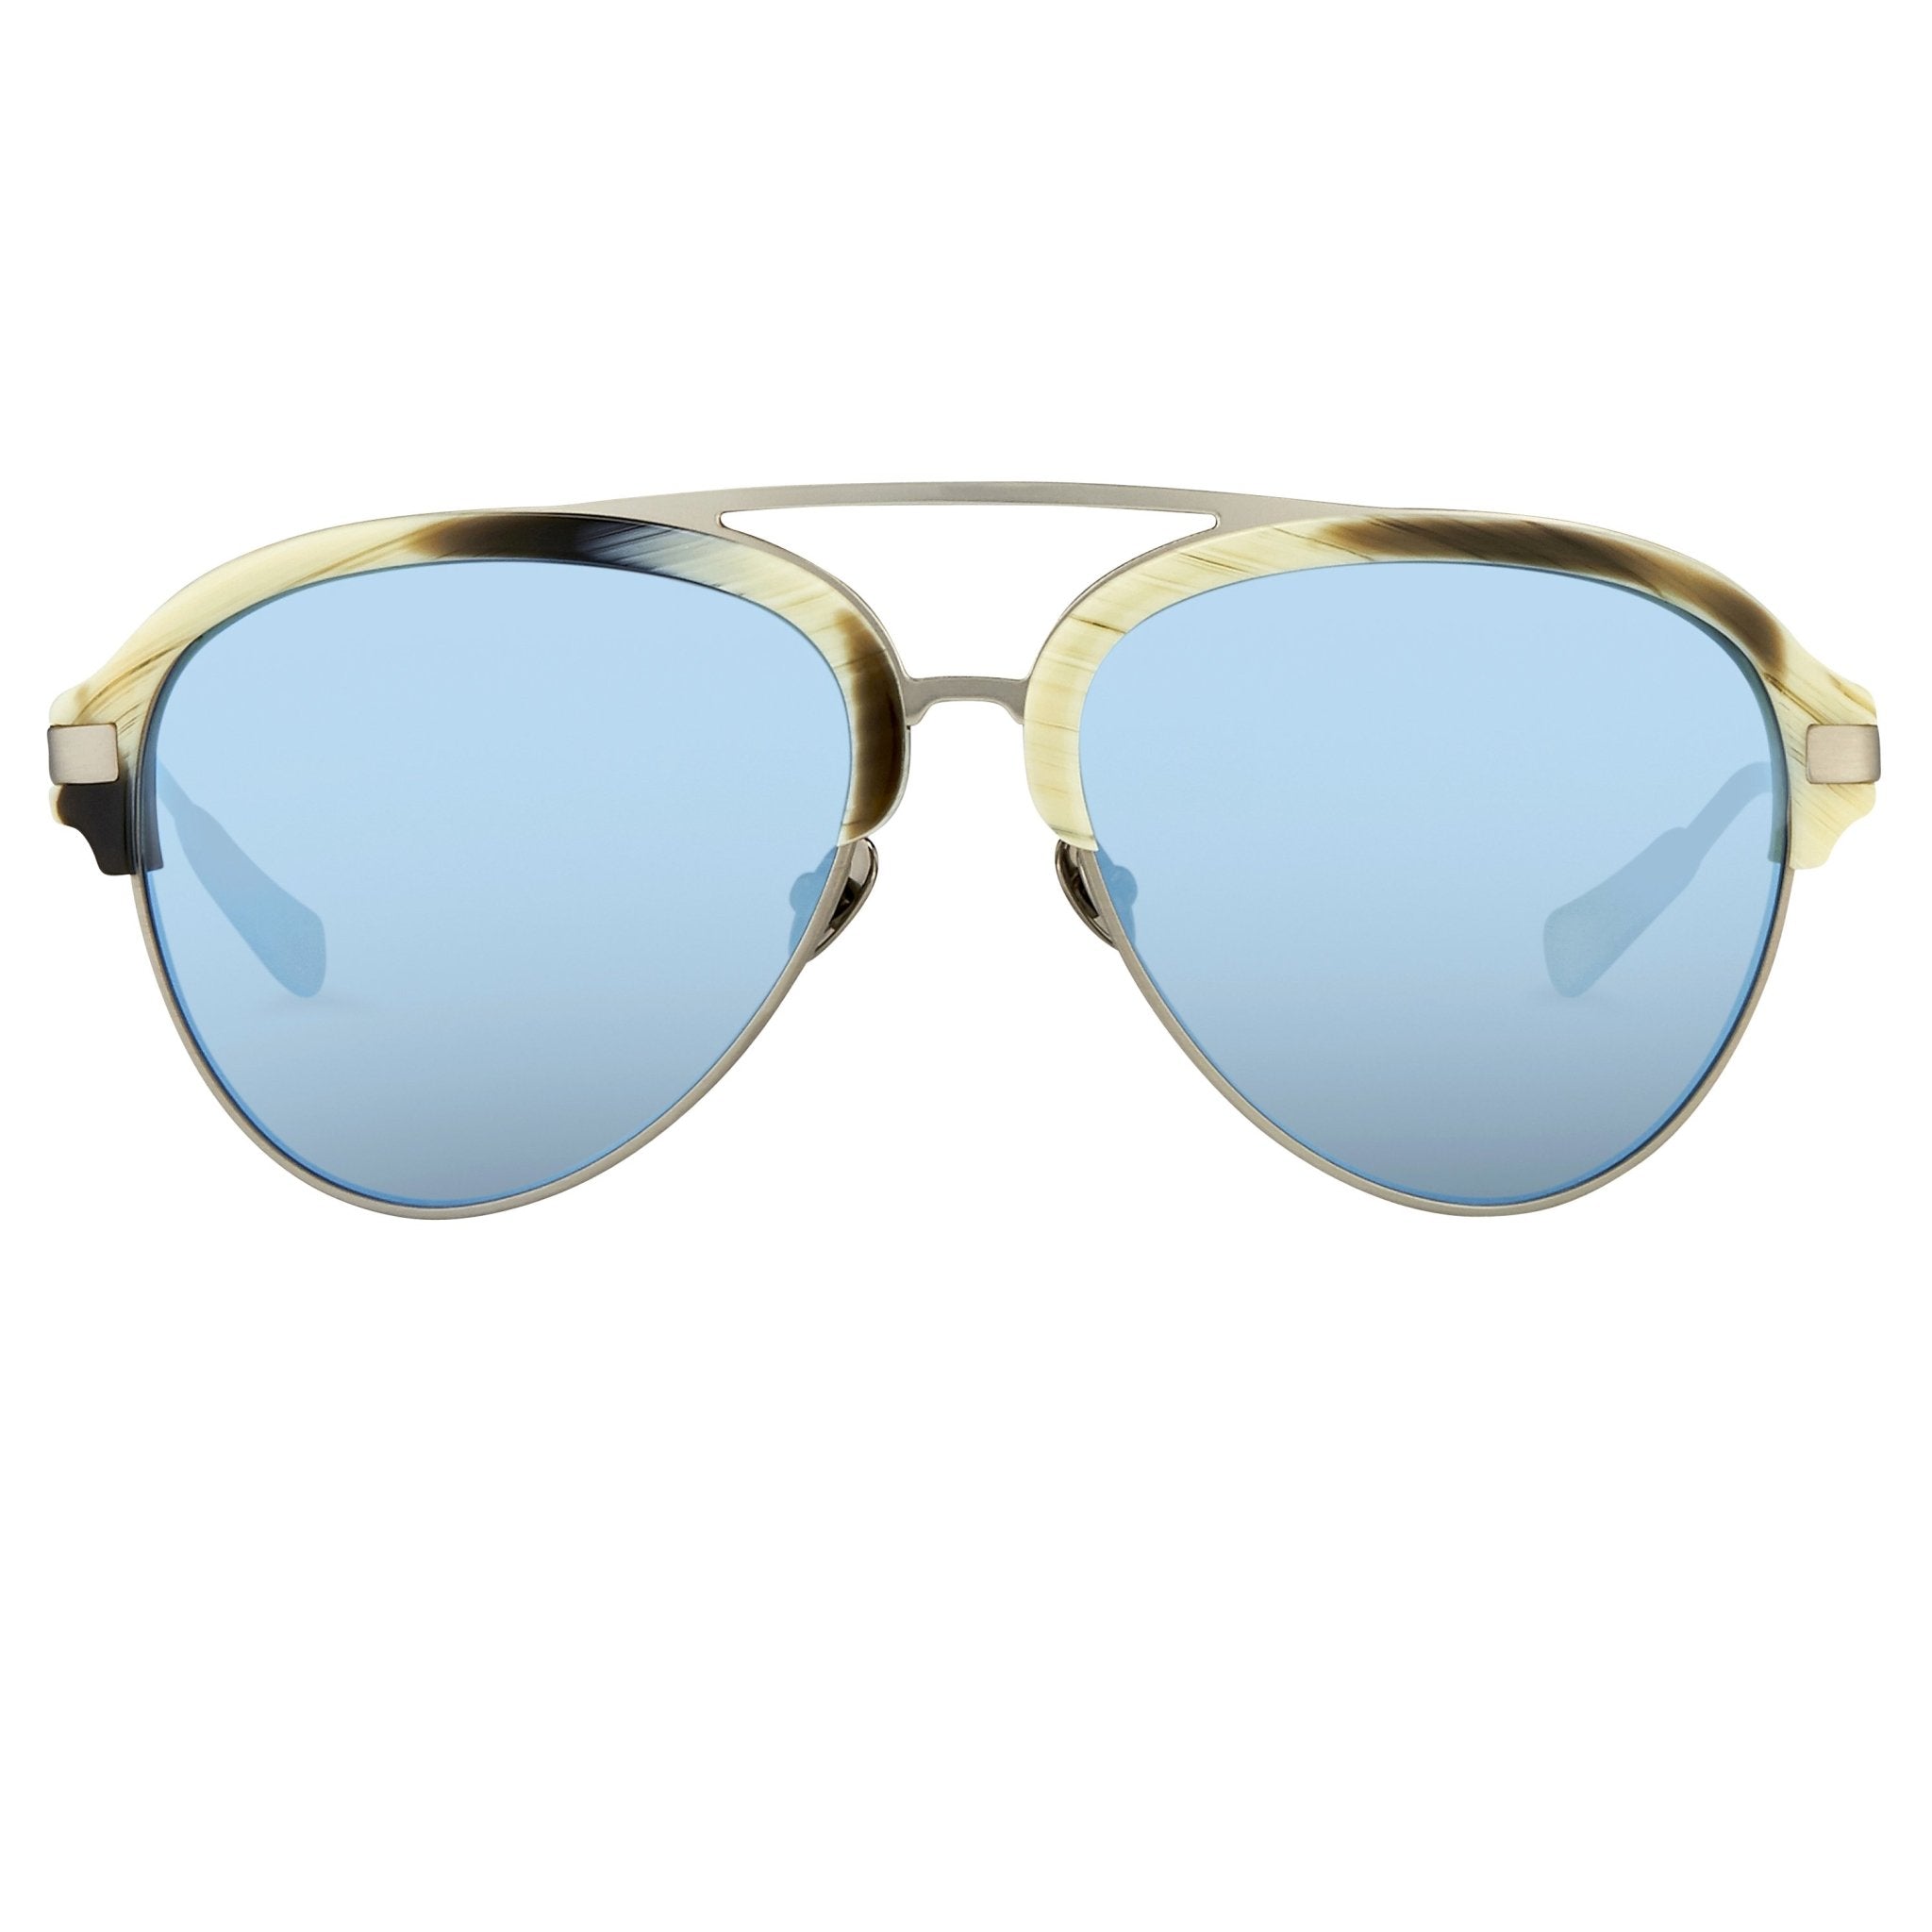 Kris Van Assche Sunglasses Brown Horn Brushed Silver and Blue Mirror Lenses Category 3 - KVA74C4SUN - Watches & Crystals